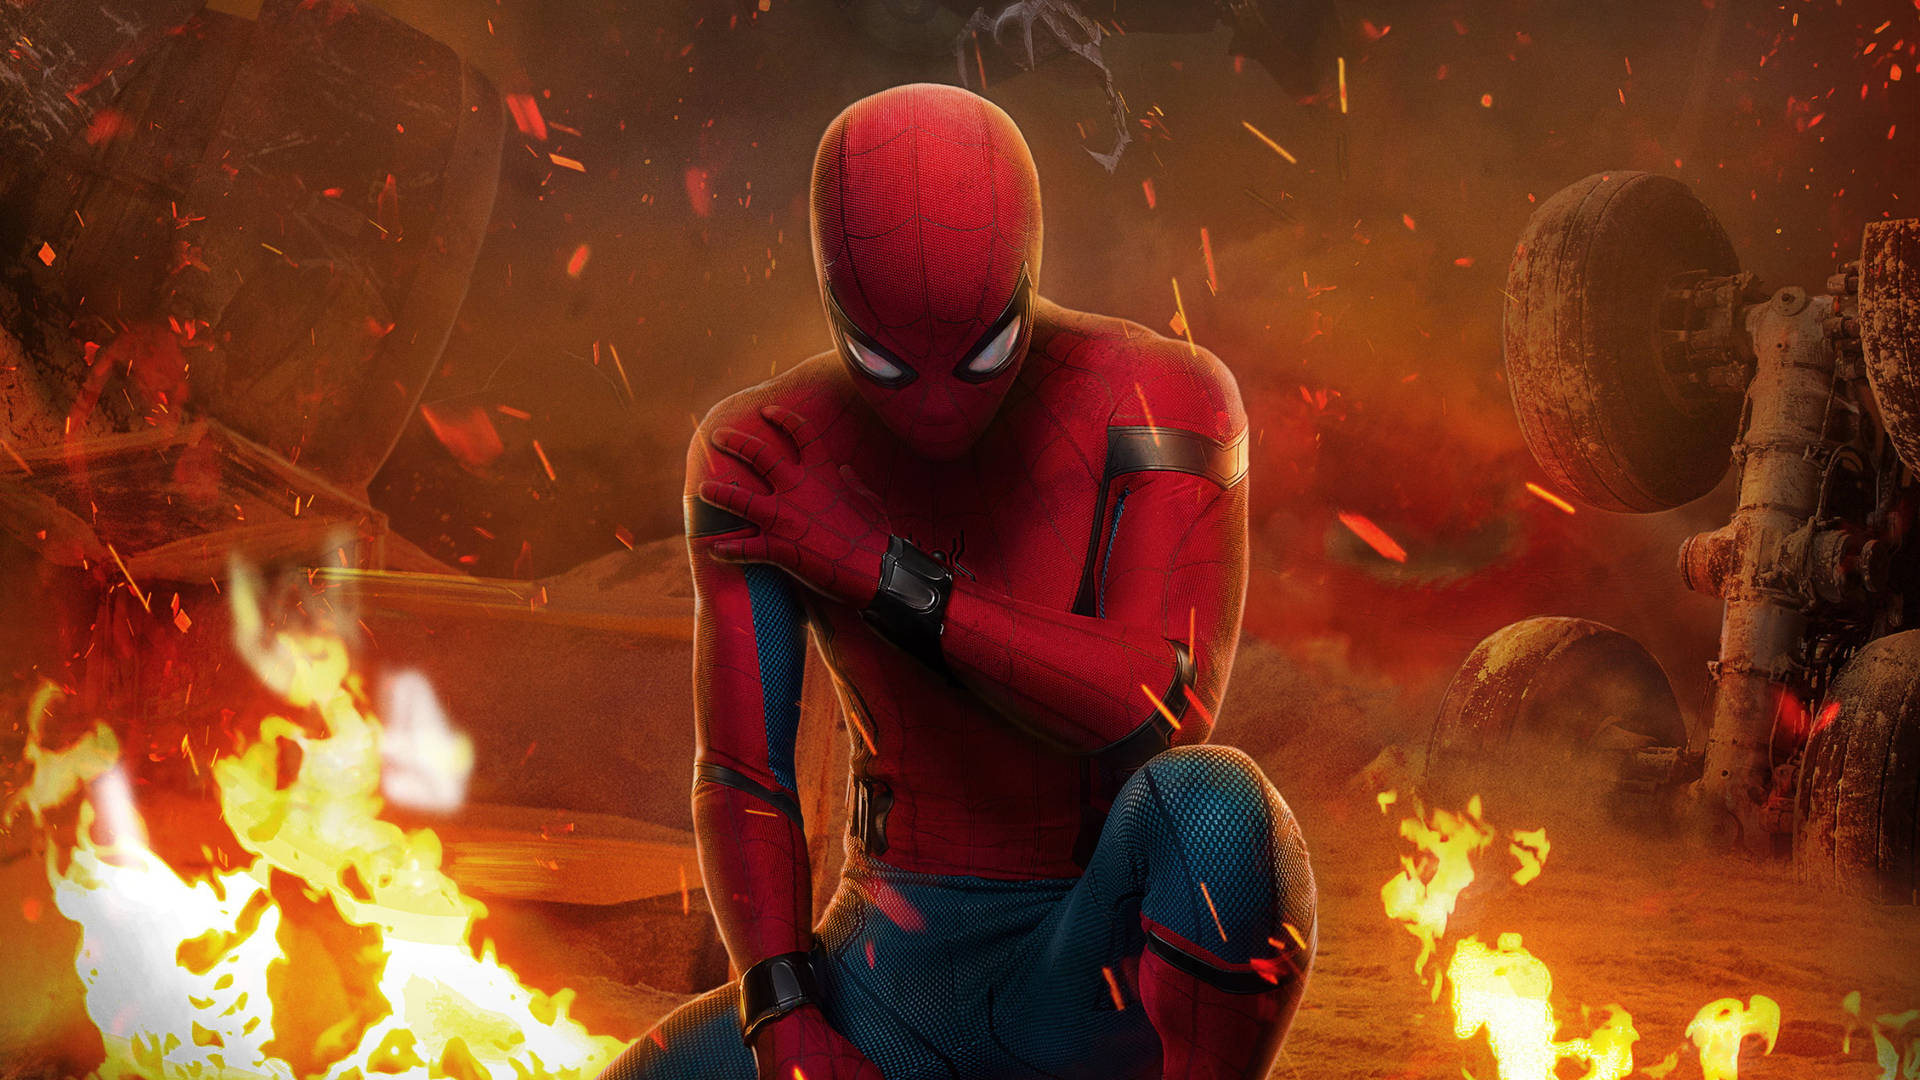 Spiderman Fights Against The Flames